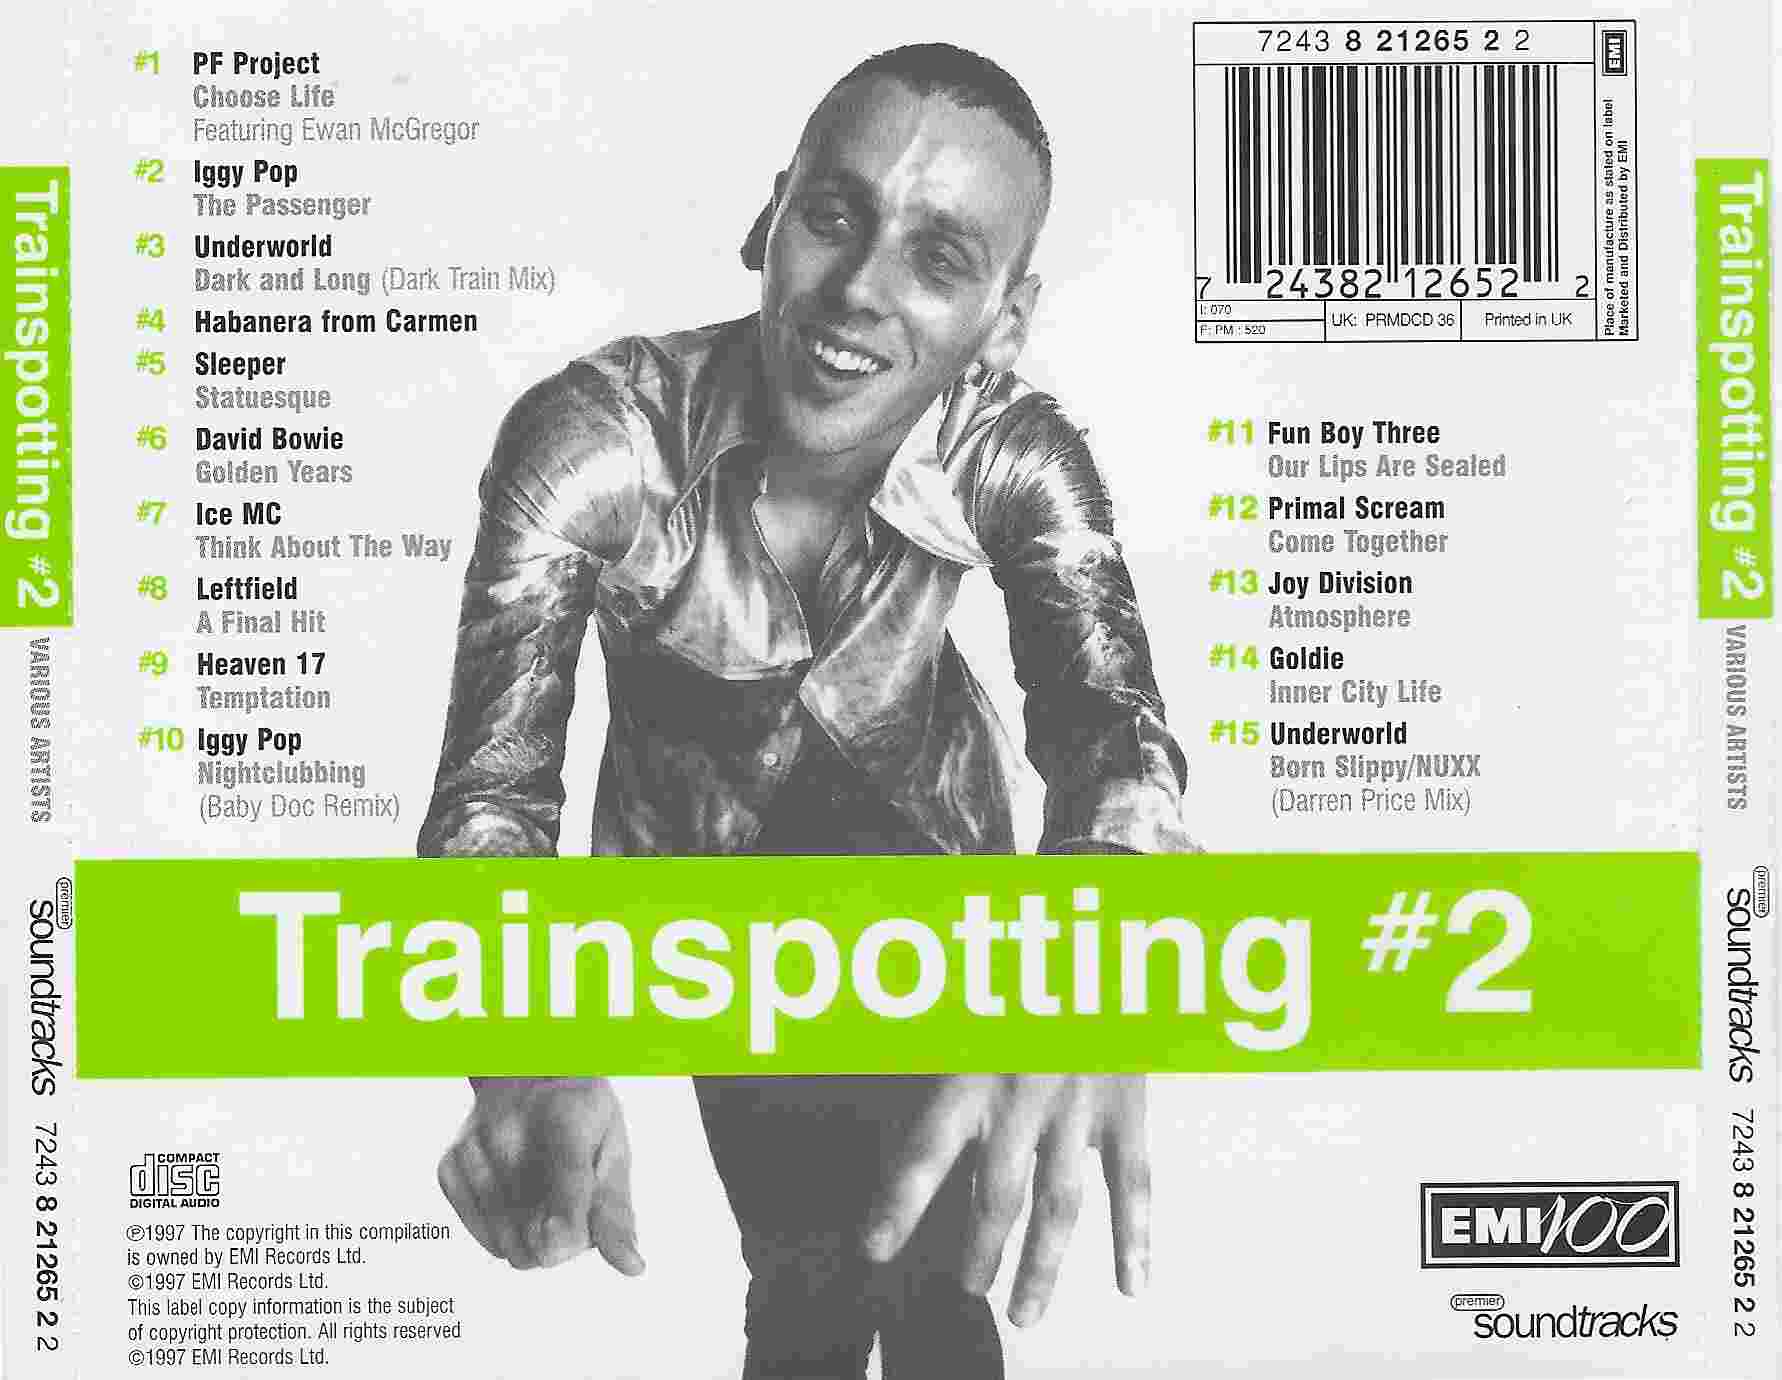 Picture of PRMDCD 36 Trainspotting #2 by artist Various from ITV, Channel 4 and Channel 5 library